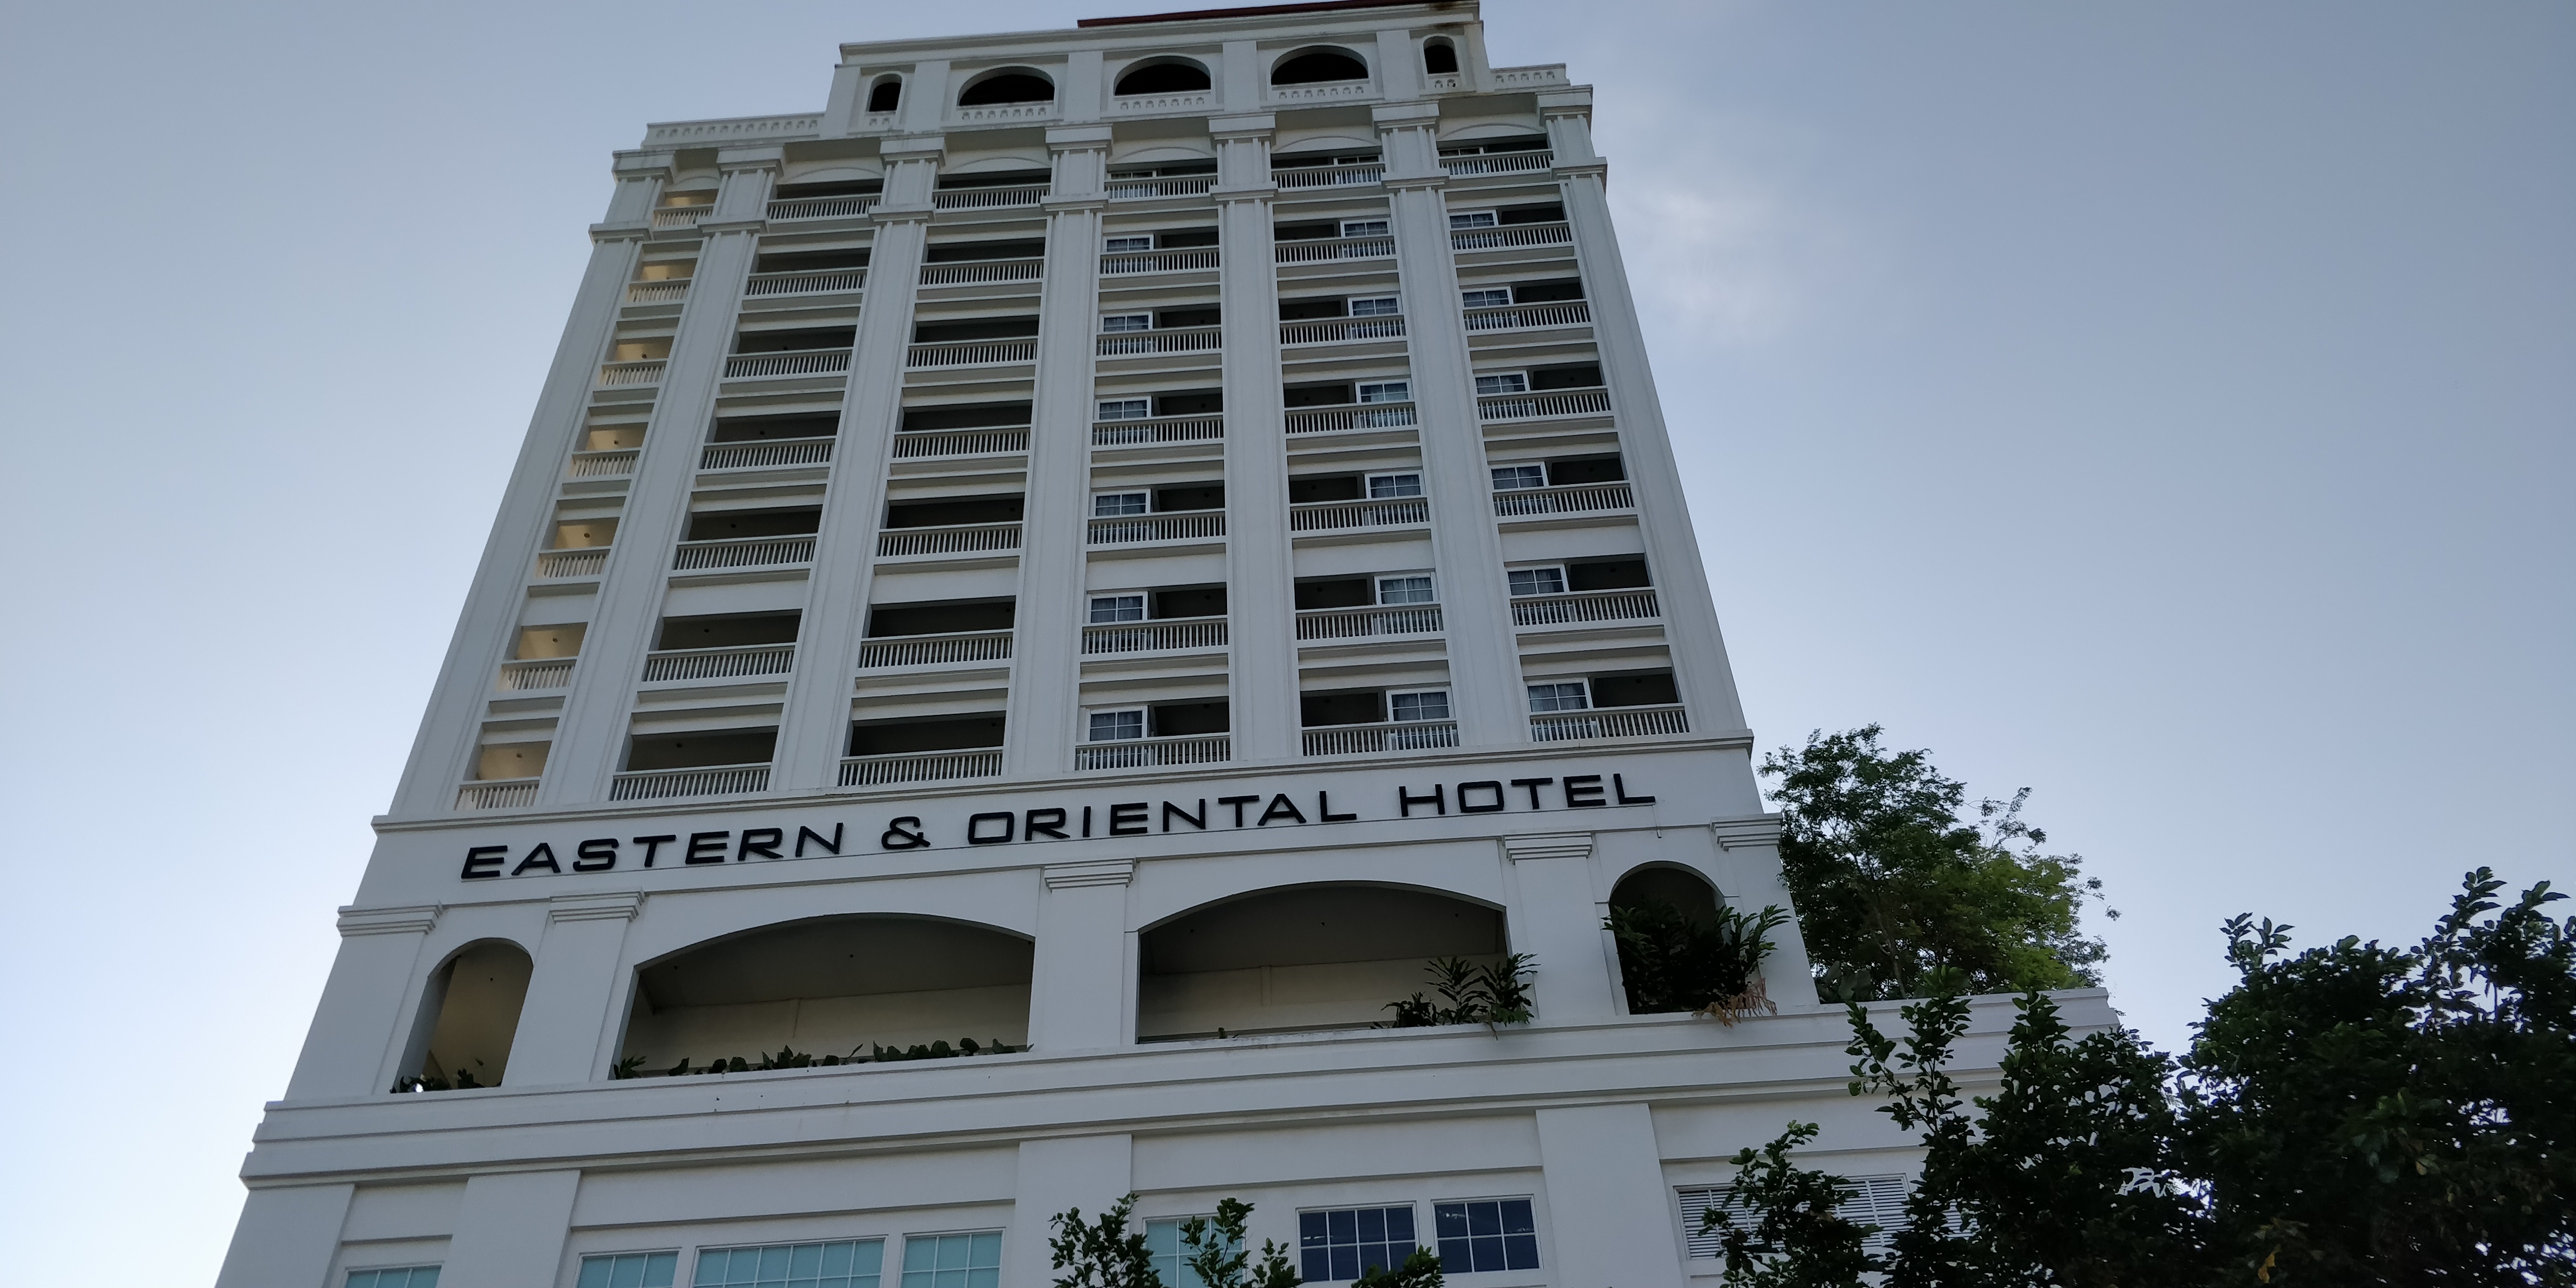 A PICTURE OF THE EASTERN & ORIENTAL HOTEL PENANG